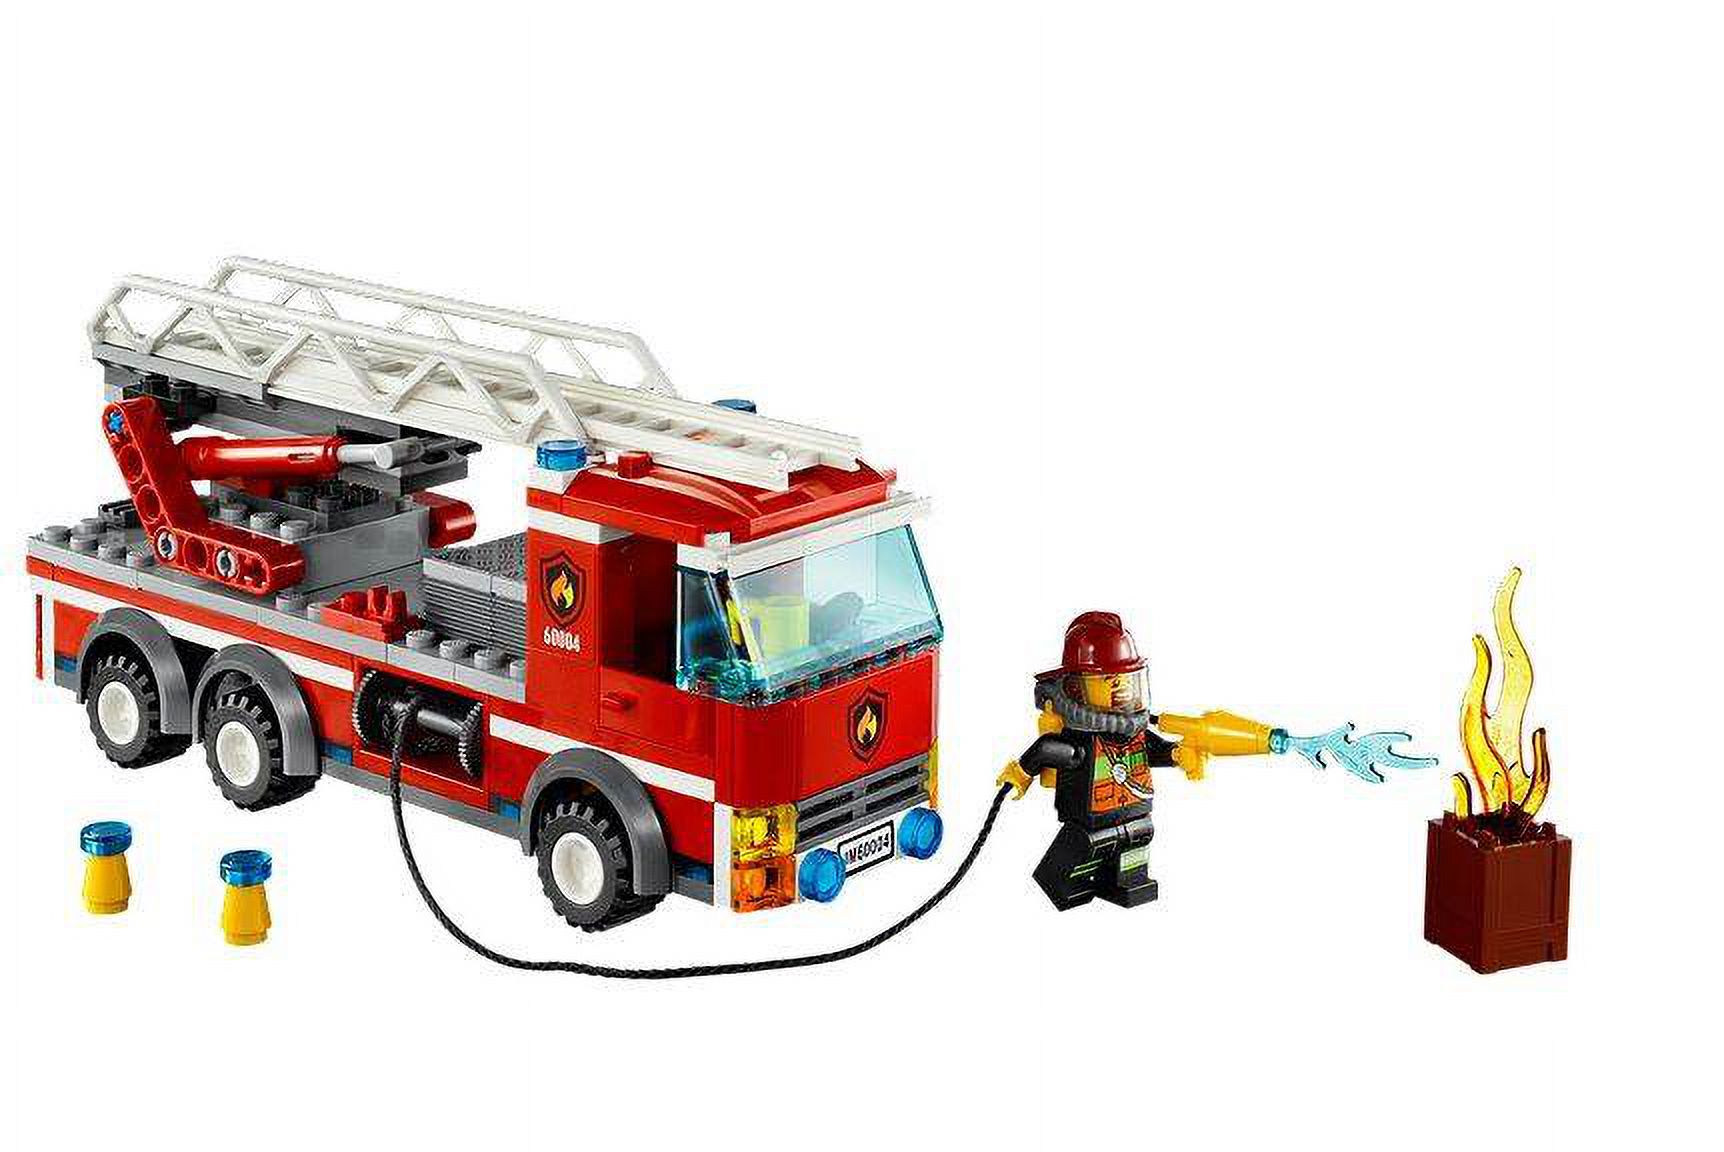 LEGO City Fire Station 60004 - image 3 of 8